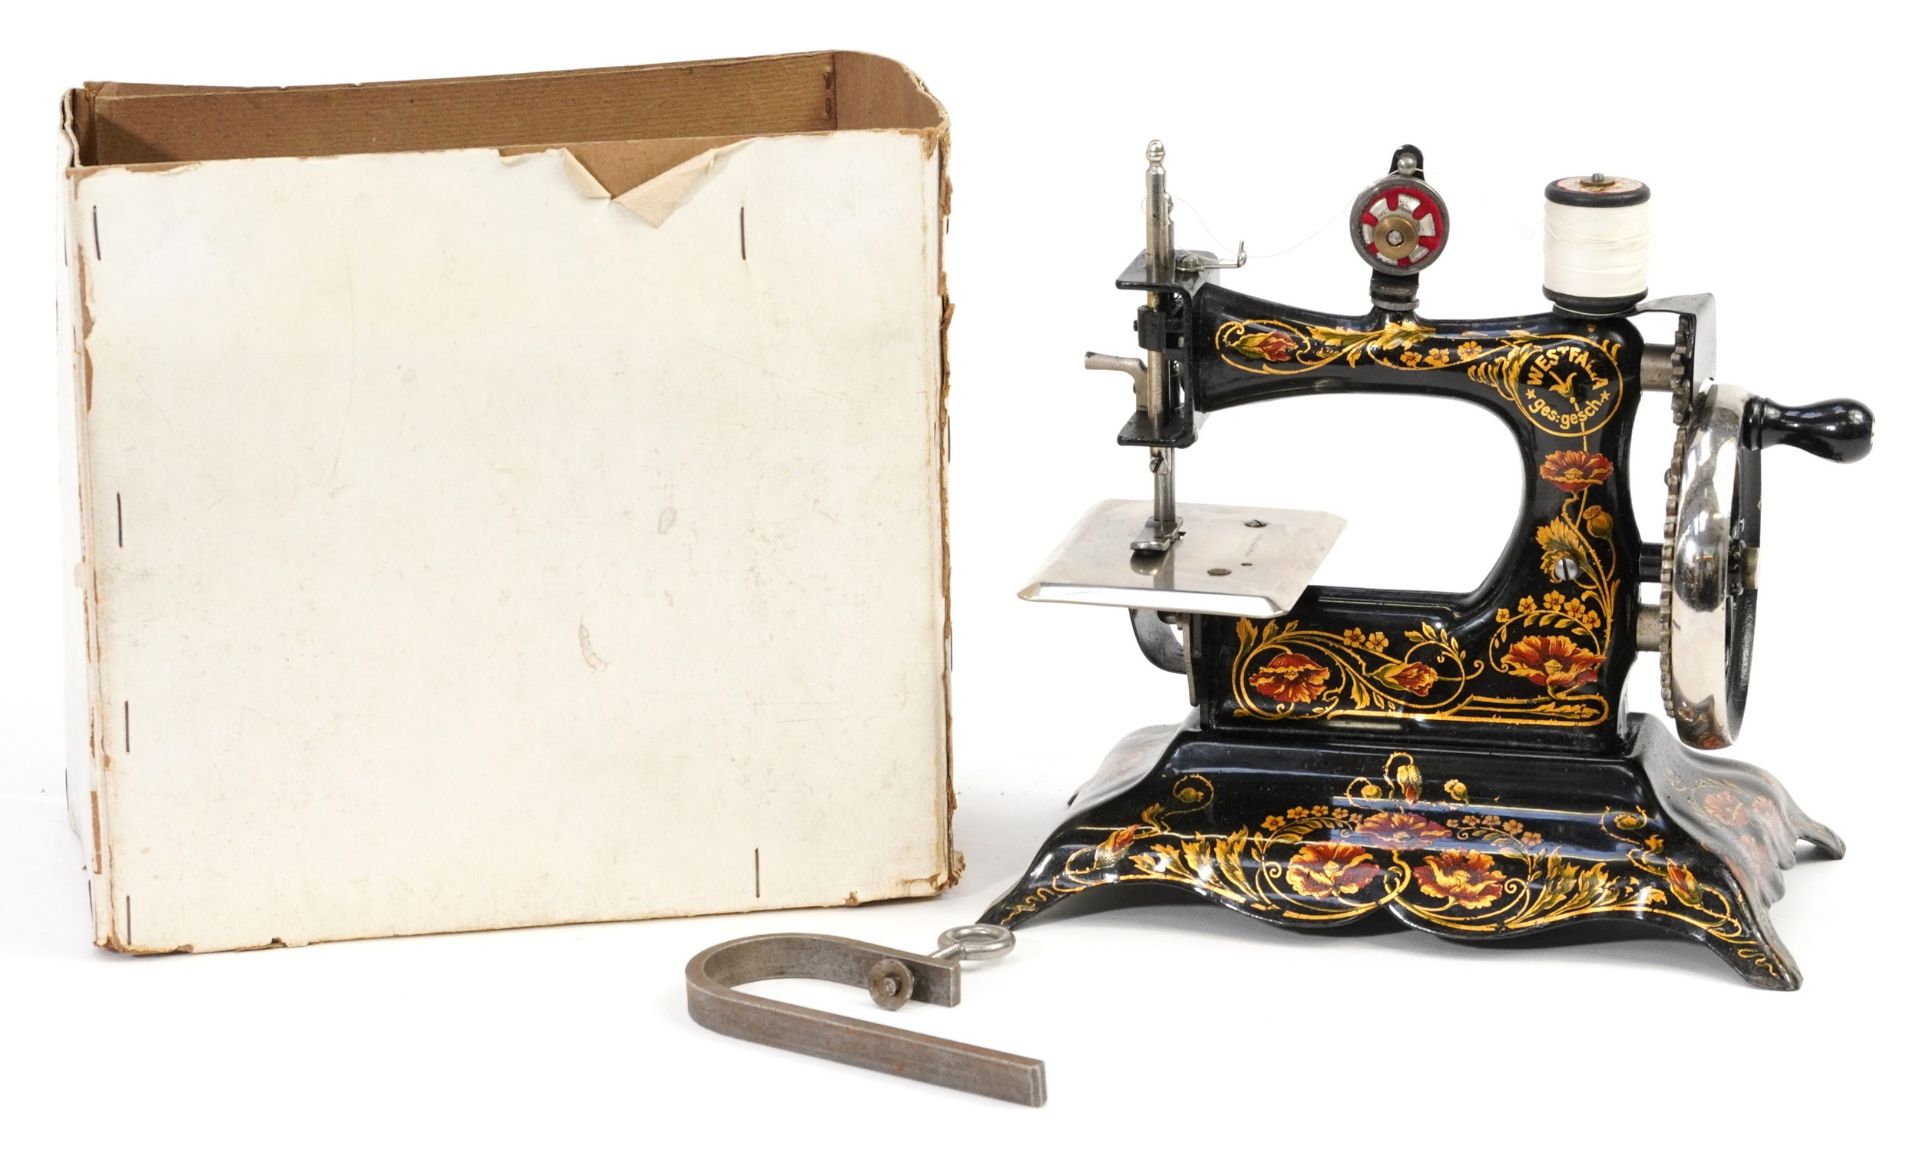 19th century German Westfalia hand operated child's sewing machine, no 7 with box and